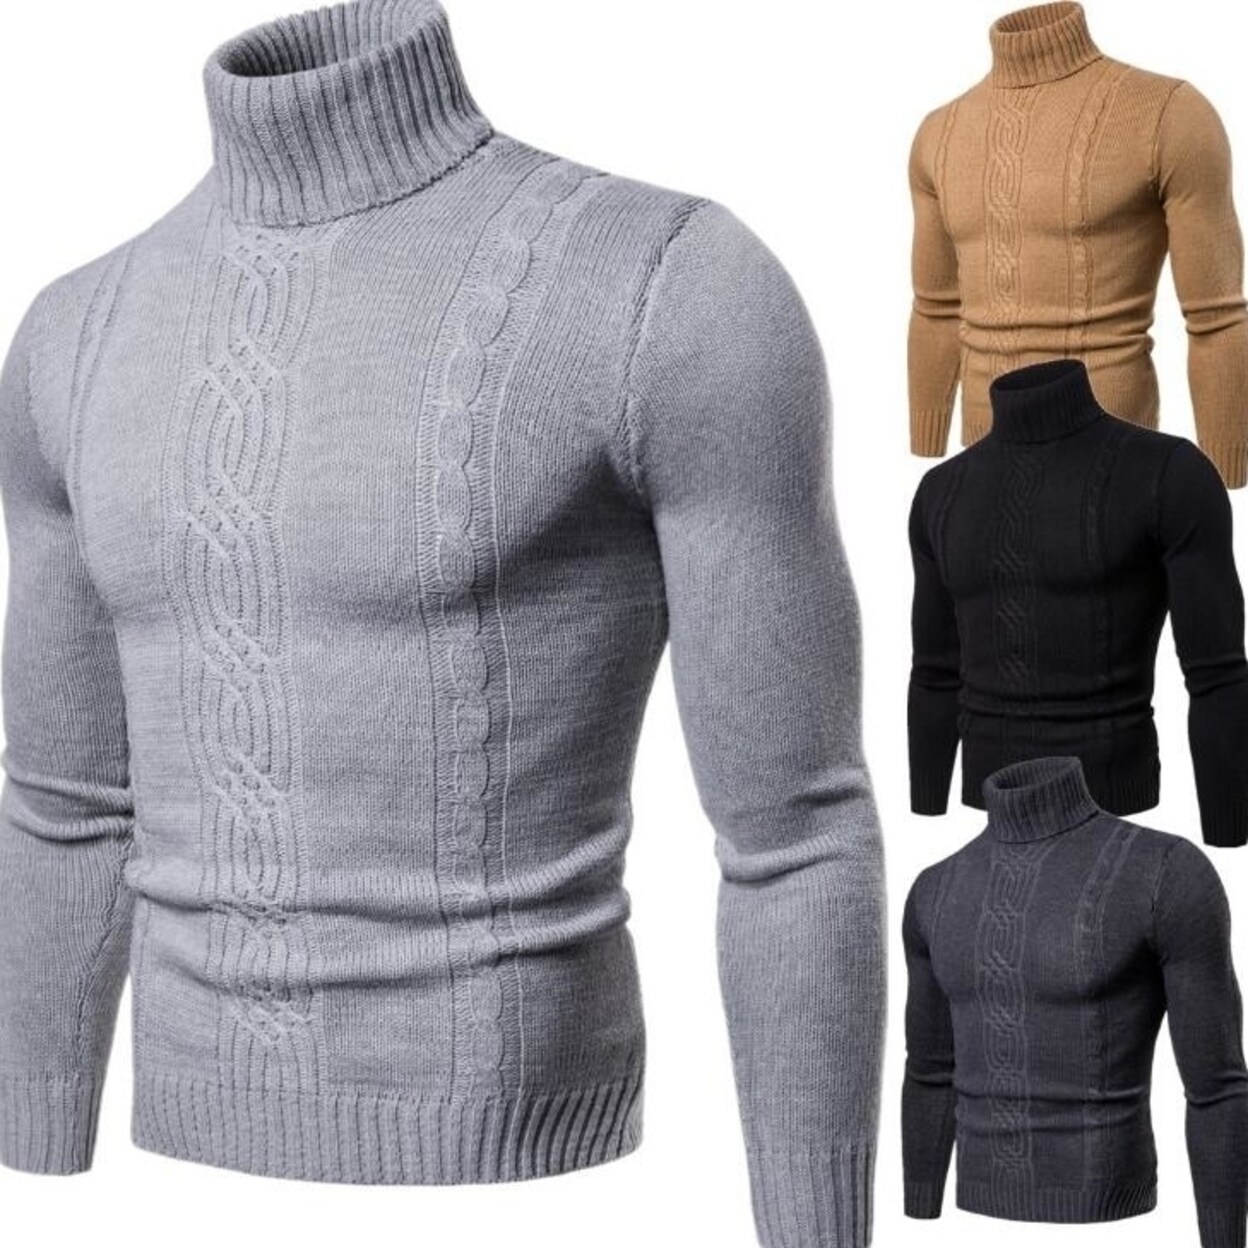 Men's Turtleneck Sweater Knitwear M-2xl Pullover Nitted Slim fit Casual ...